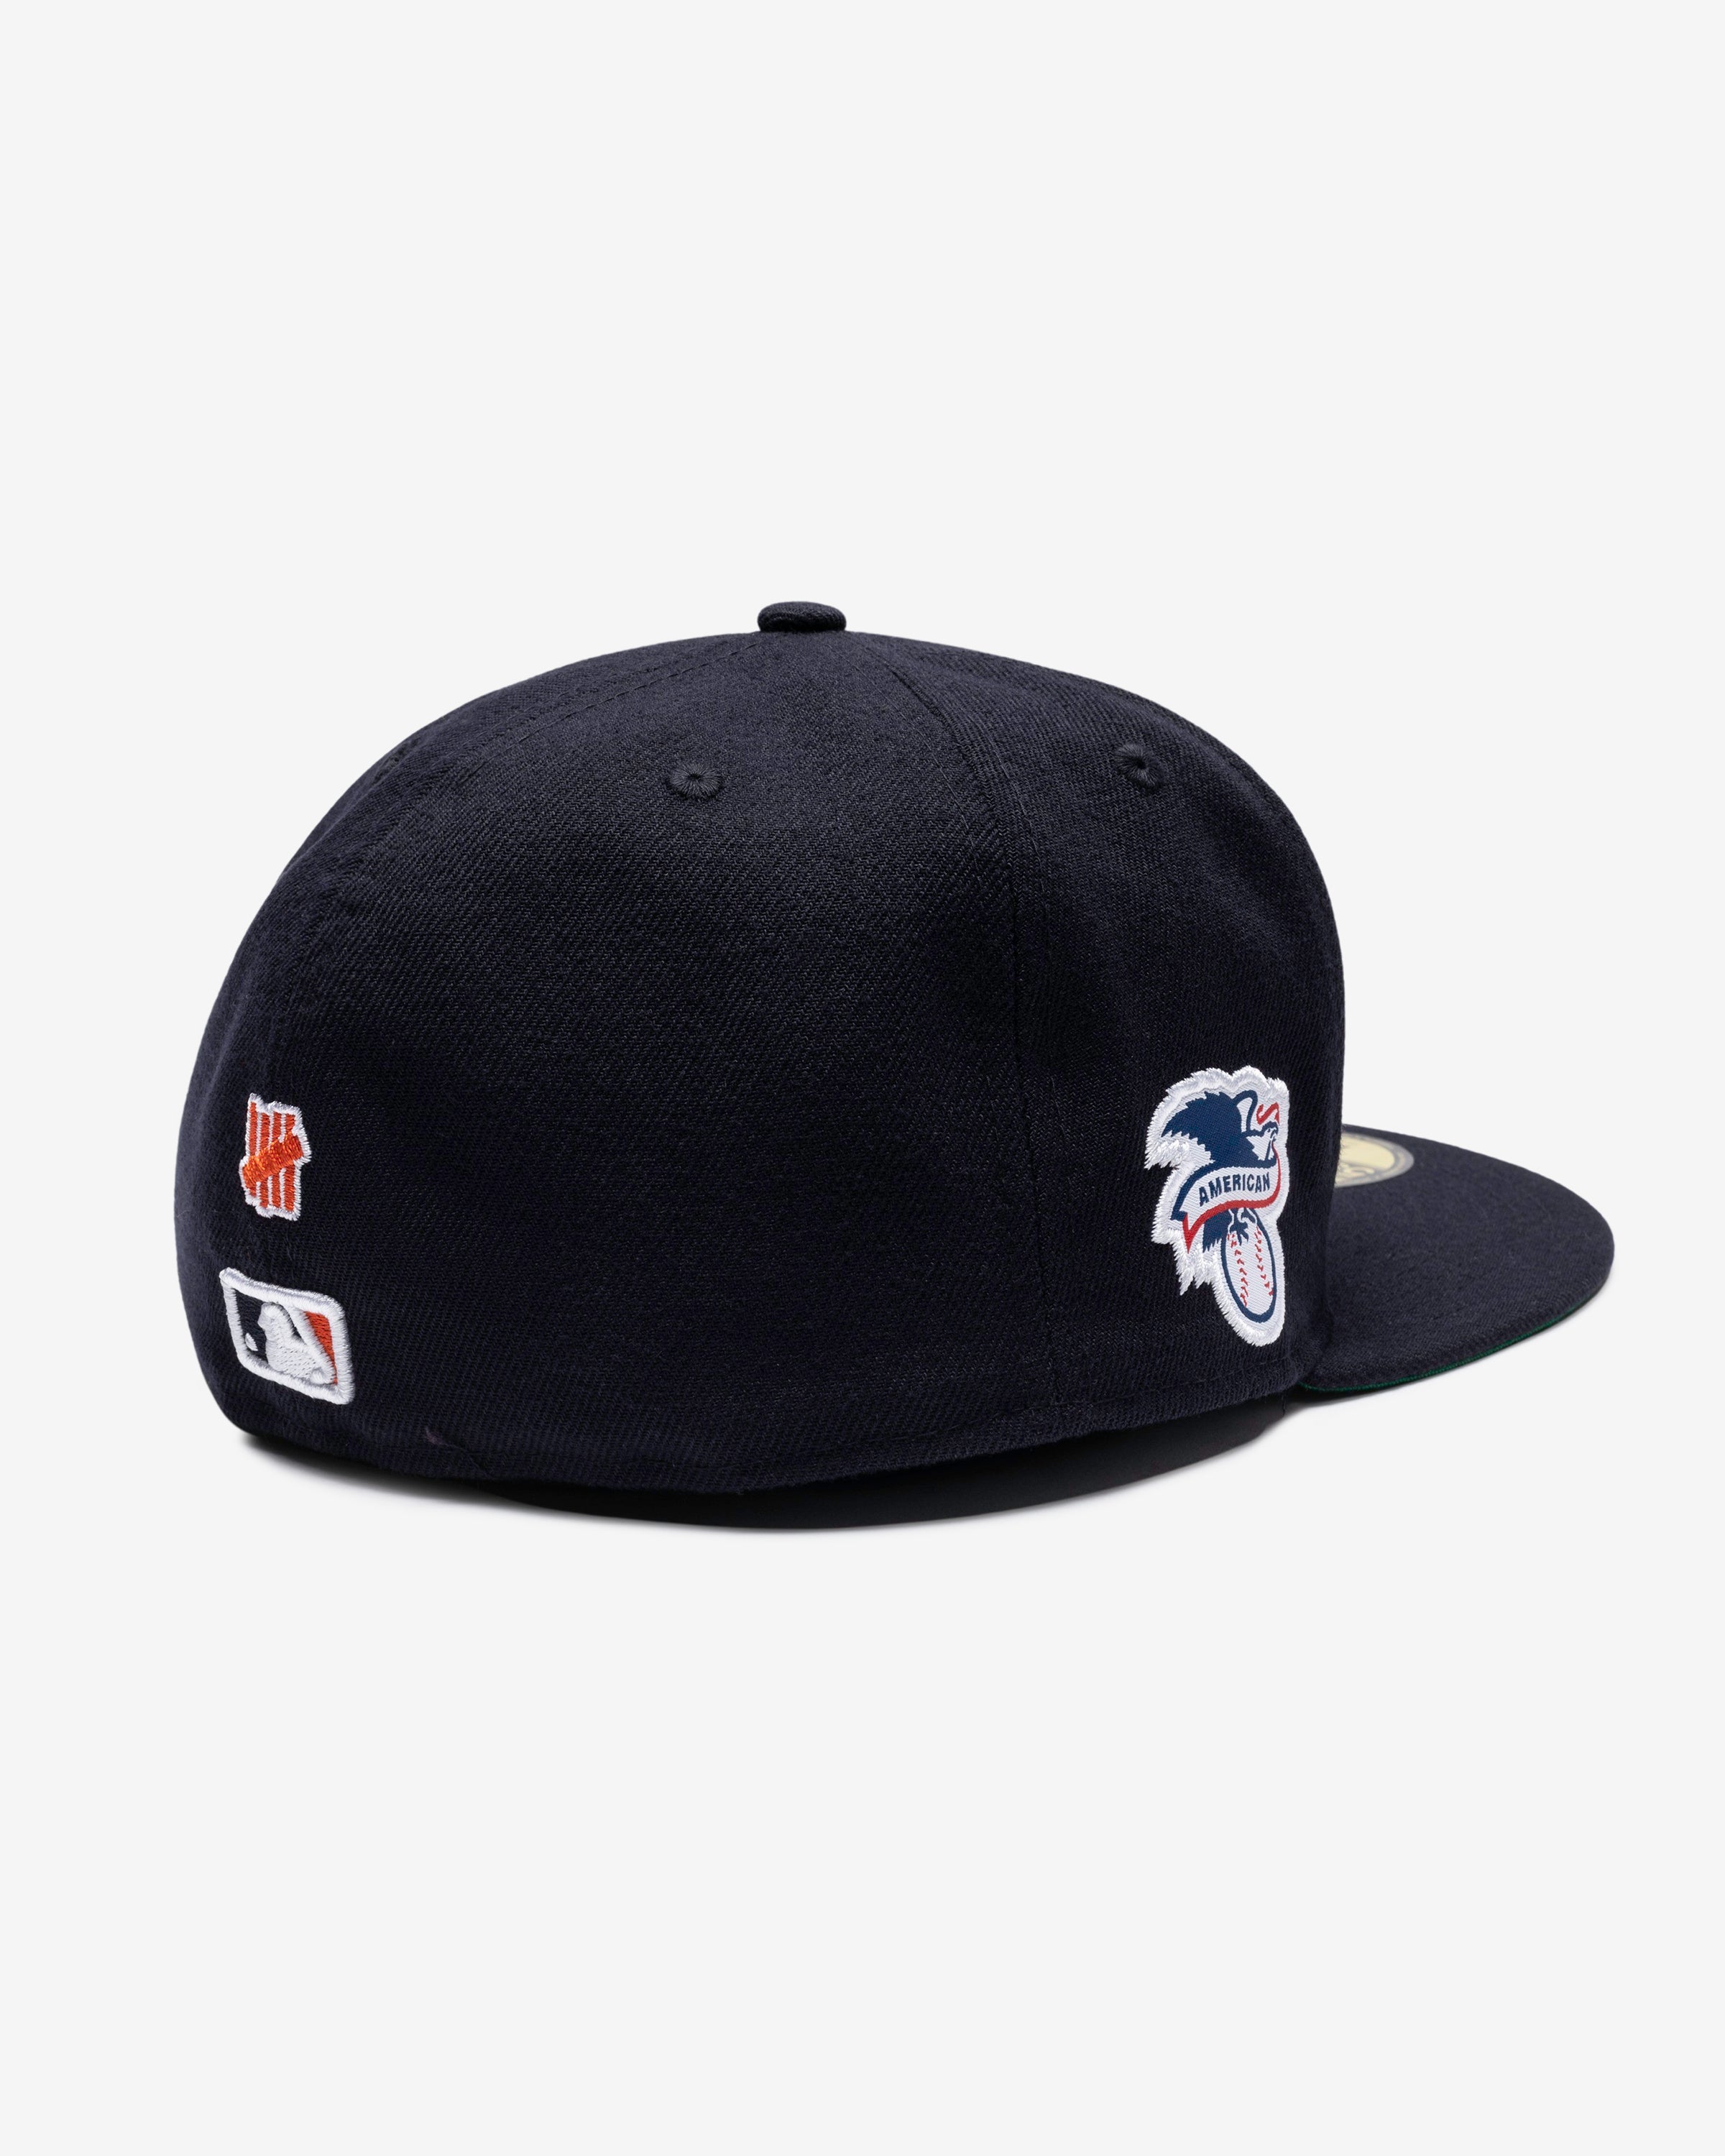 UNDEFEATED X NE X MLB FITTED - HOUSTON ASTROS